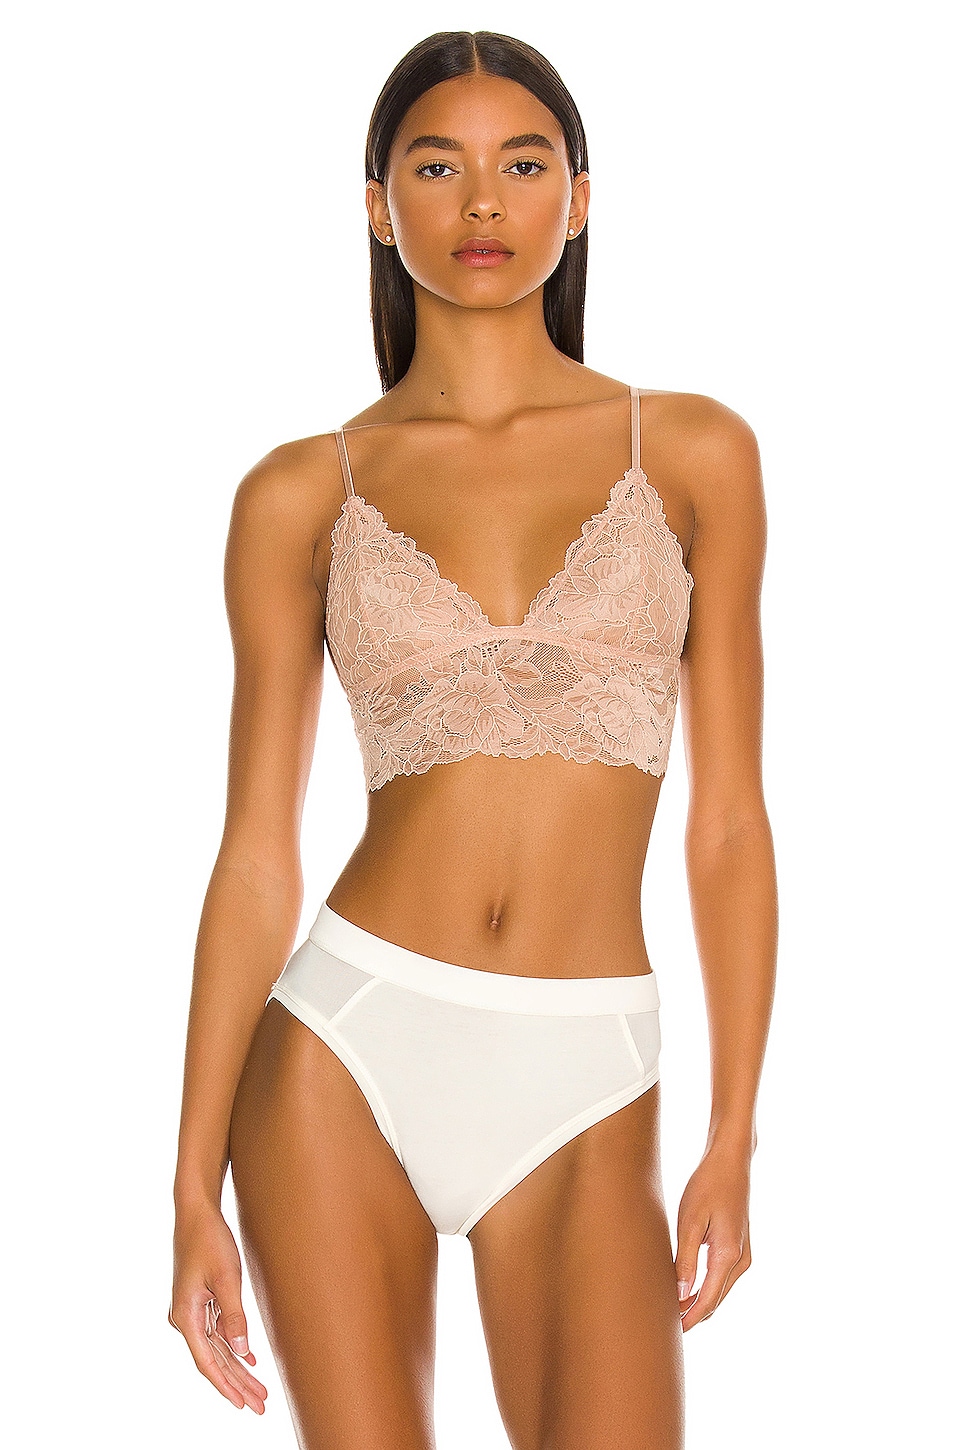 Free People Women's Everyday Lace Longline Bralette, Ivory, White